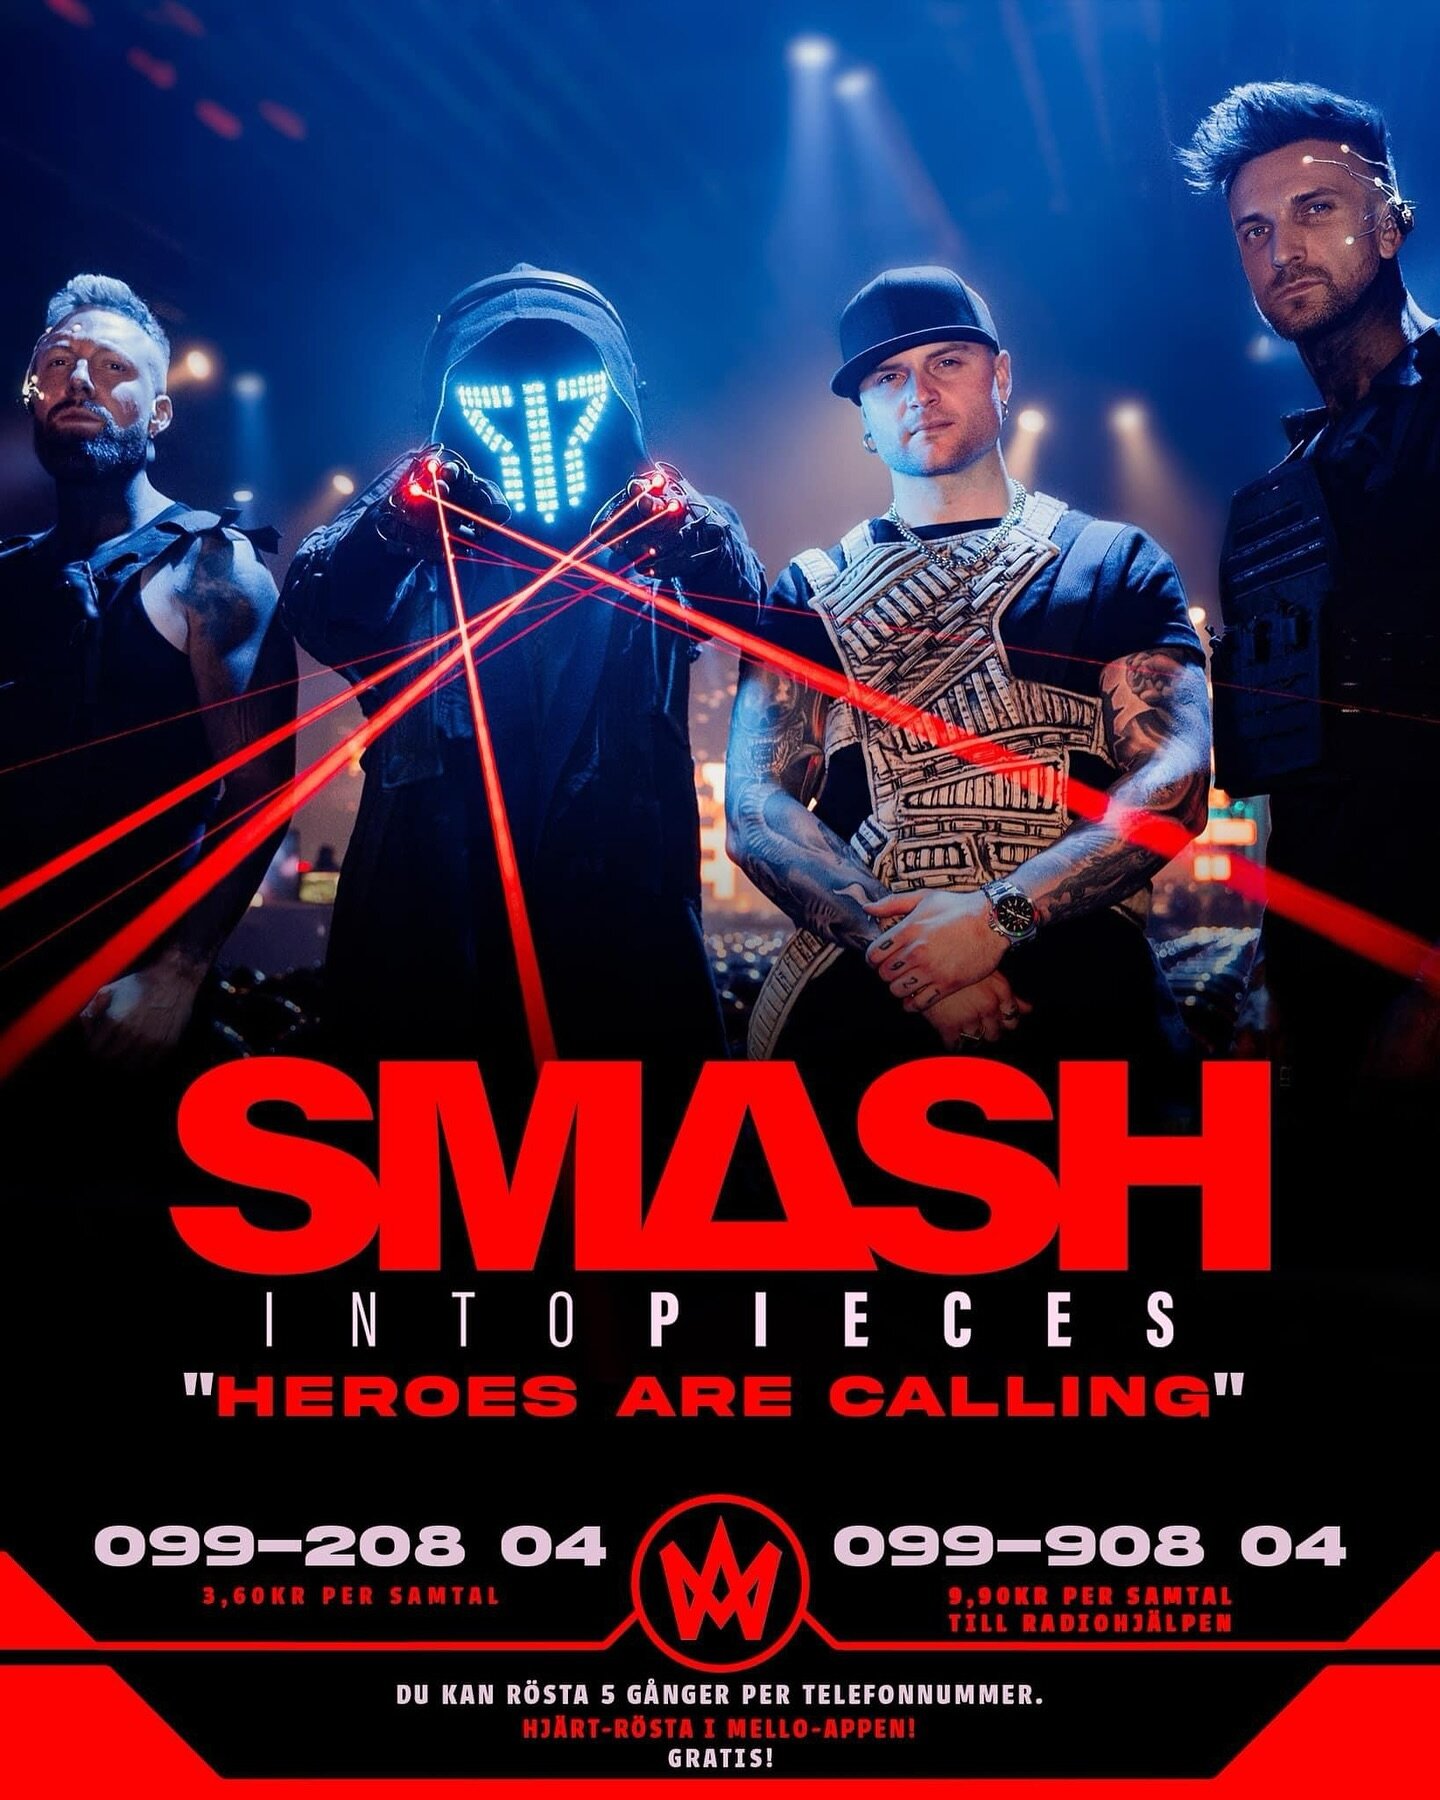 What a journey, tonight&rsquo;s the night! @smashintopiecesofficial in the finals of @melodifestivalen! Don&rsquo;t forget to vote!